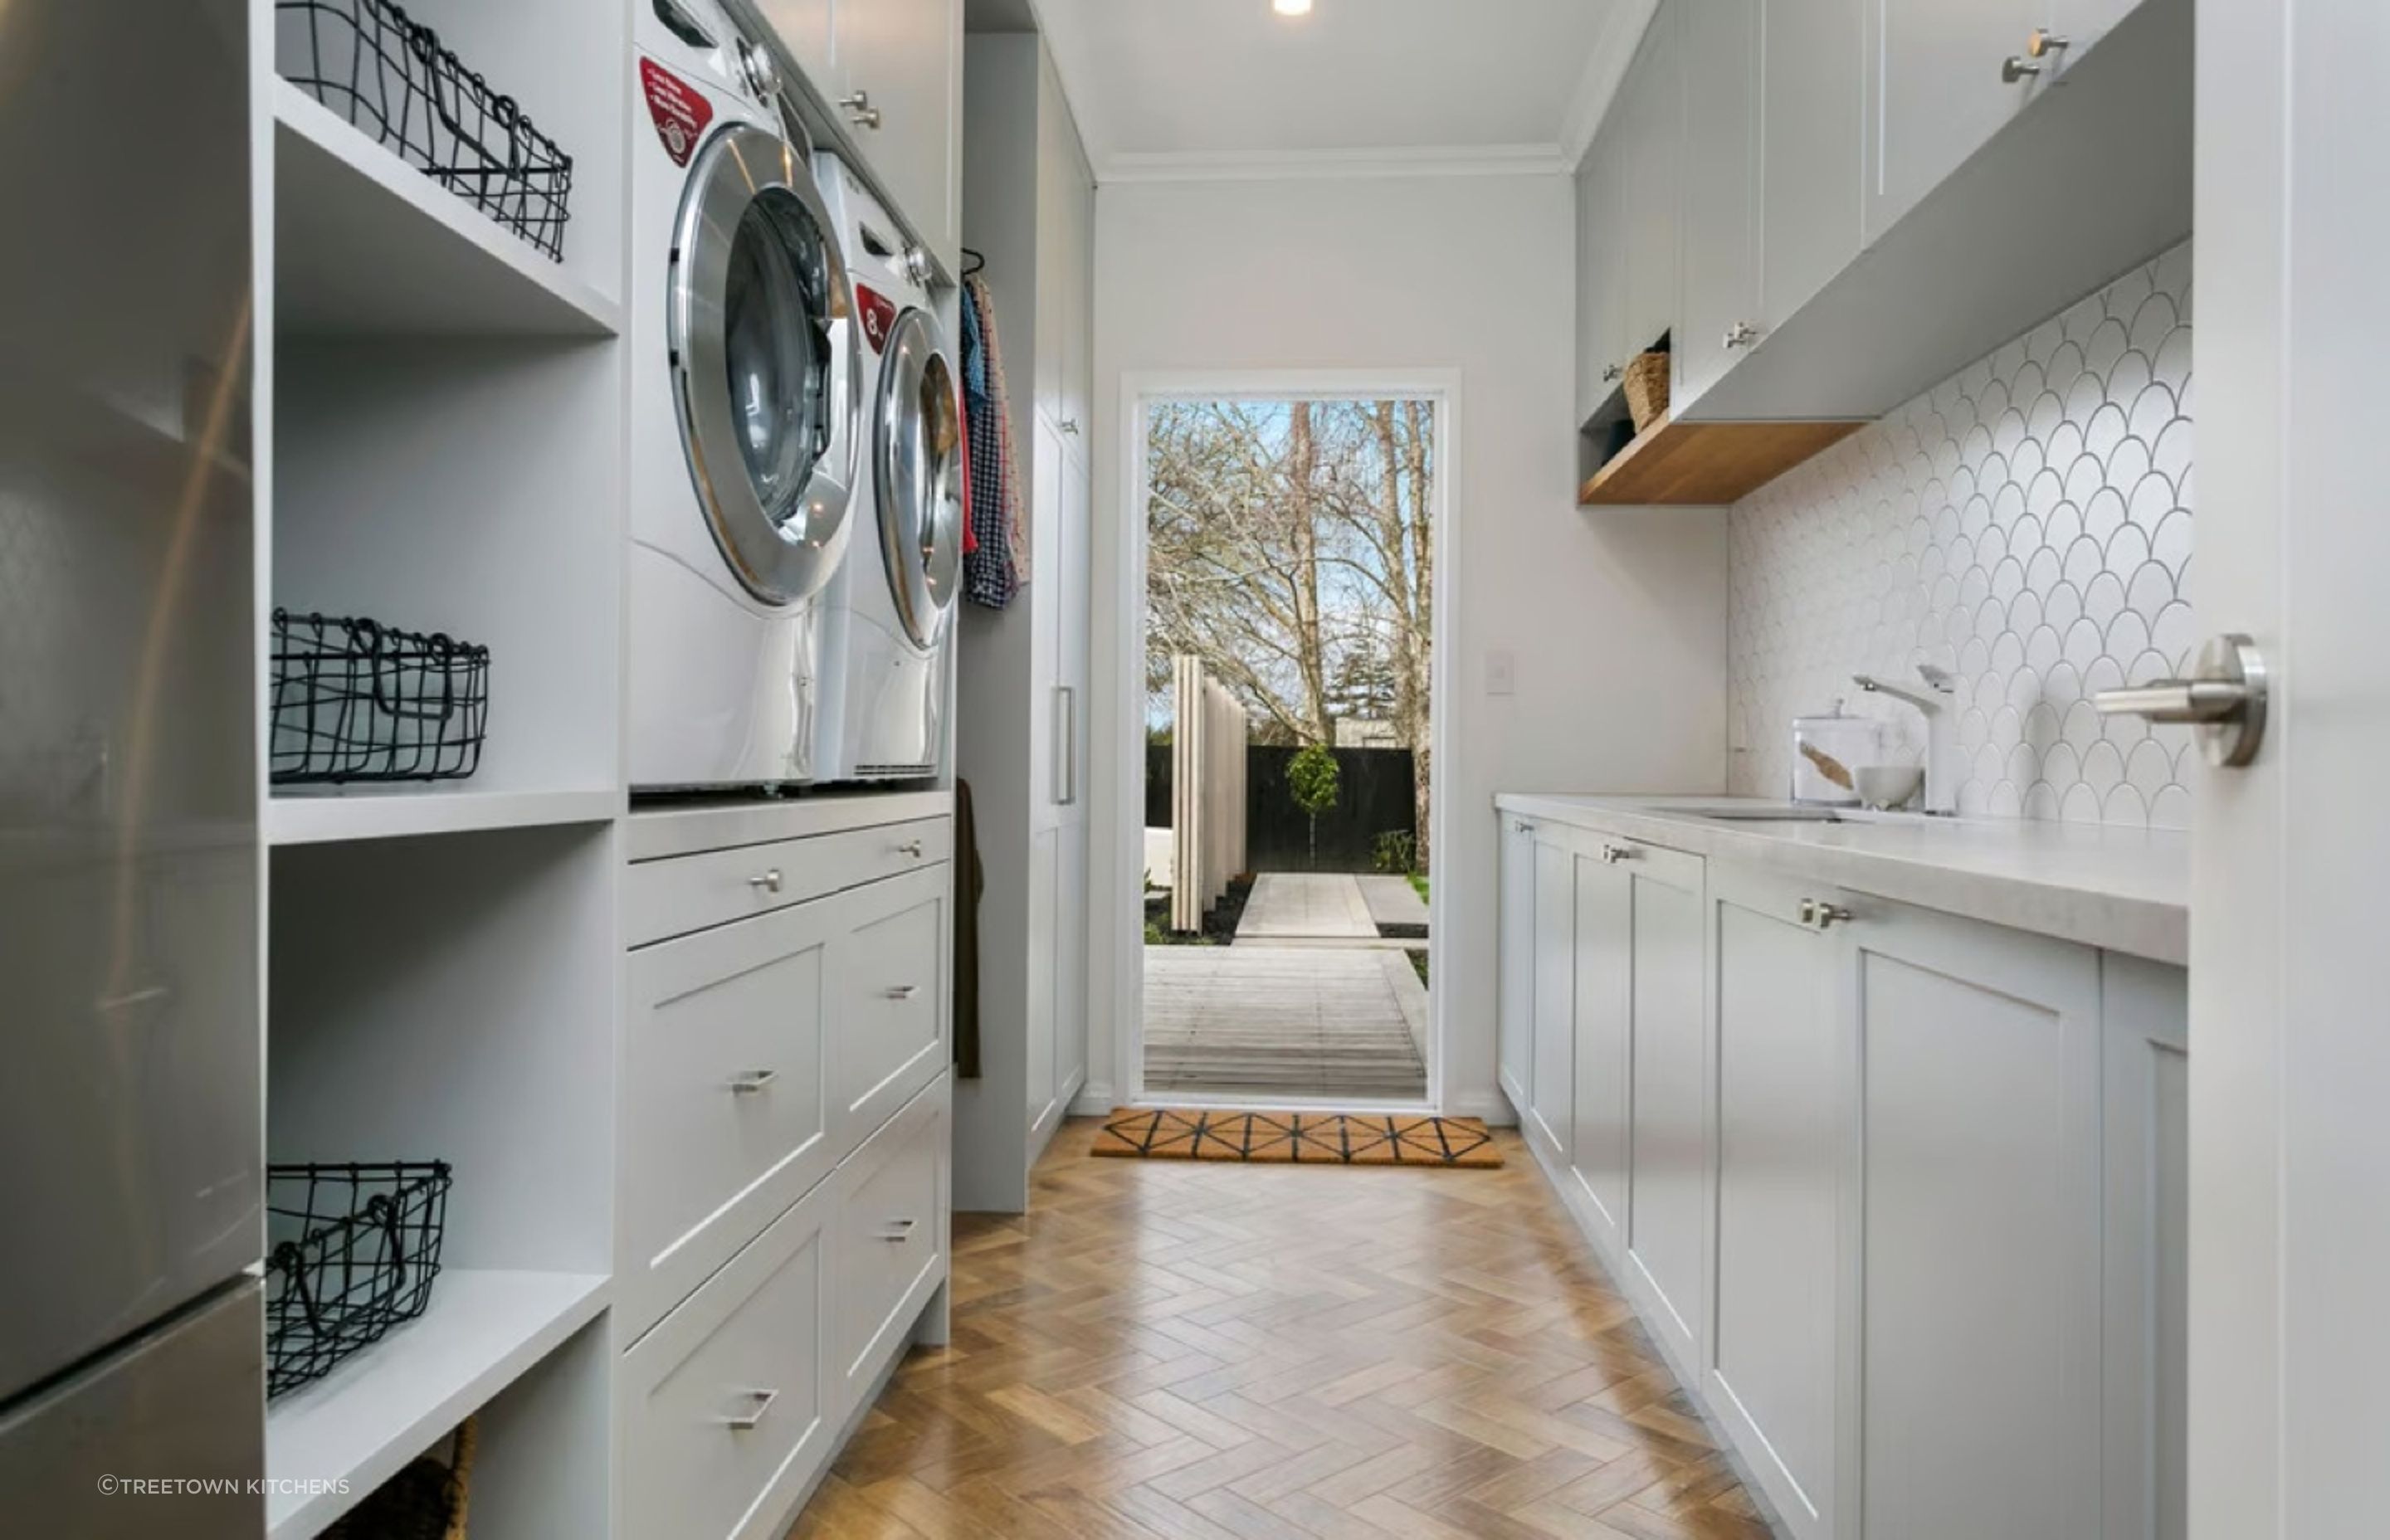 A great example of Herringbone flooring in the laundry space of this renovation project in Tamahere.